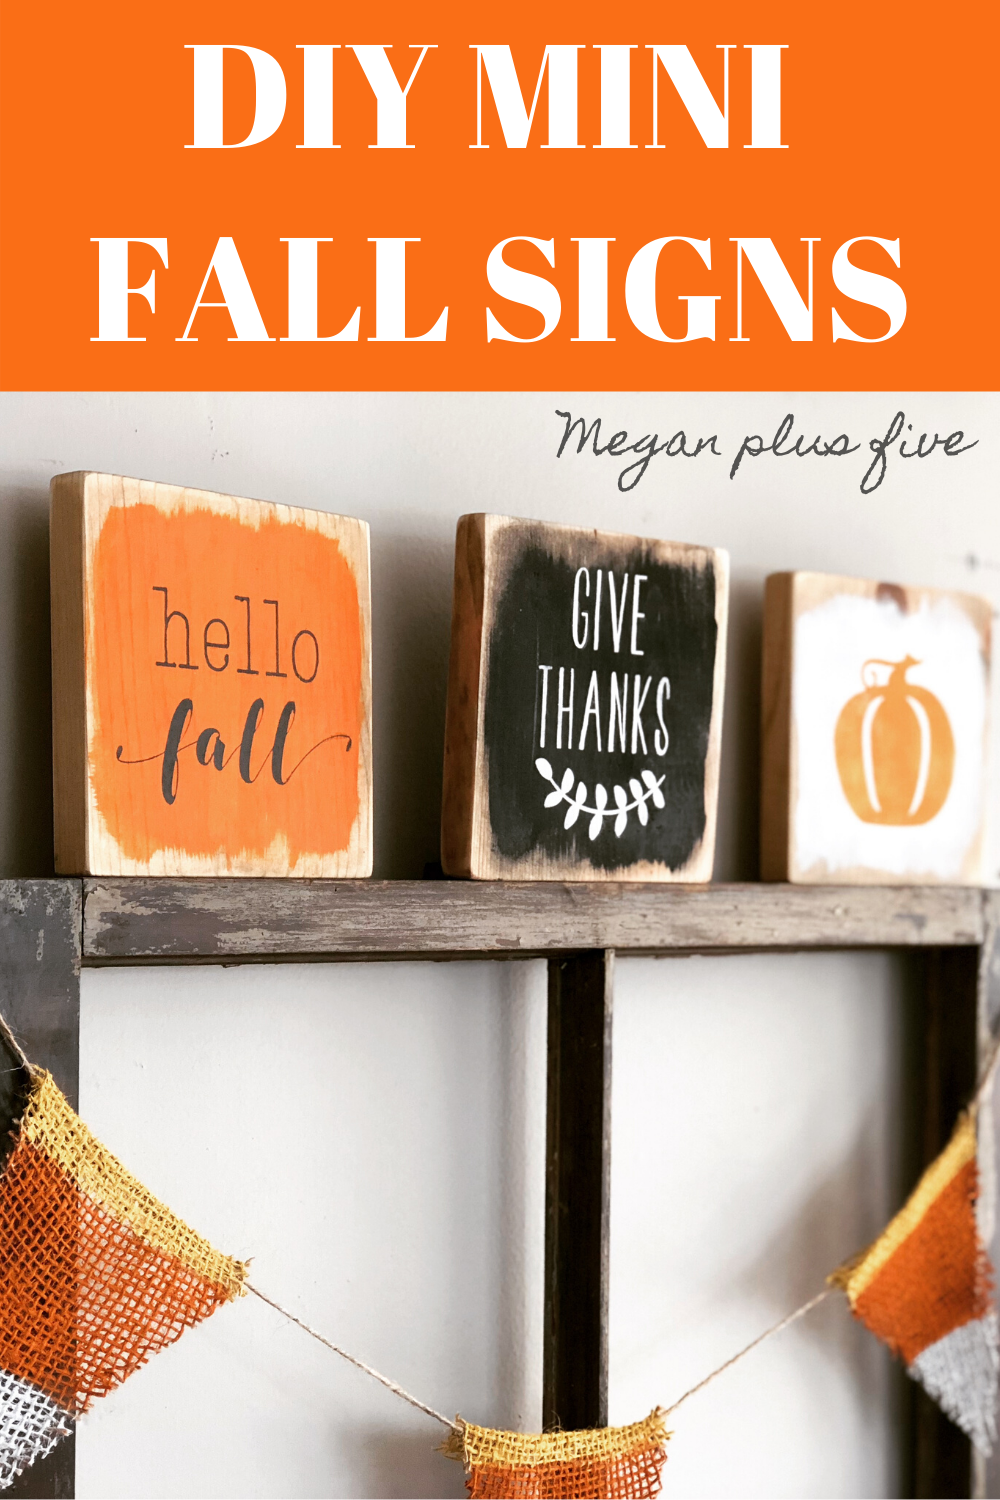 DIY painted fall signs. How to make your own farmhouse style signs for your fall themed decor. These painted tiny signs are so perfect for coffee bars, tierd trays and mantles. This trio of hello fall, give thanks, and a pumpkin are hand painted in orange, black and white, the classic fall colors. This tutorial will take you step by step on how to make your own stenciled wooden signs at home.